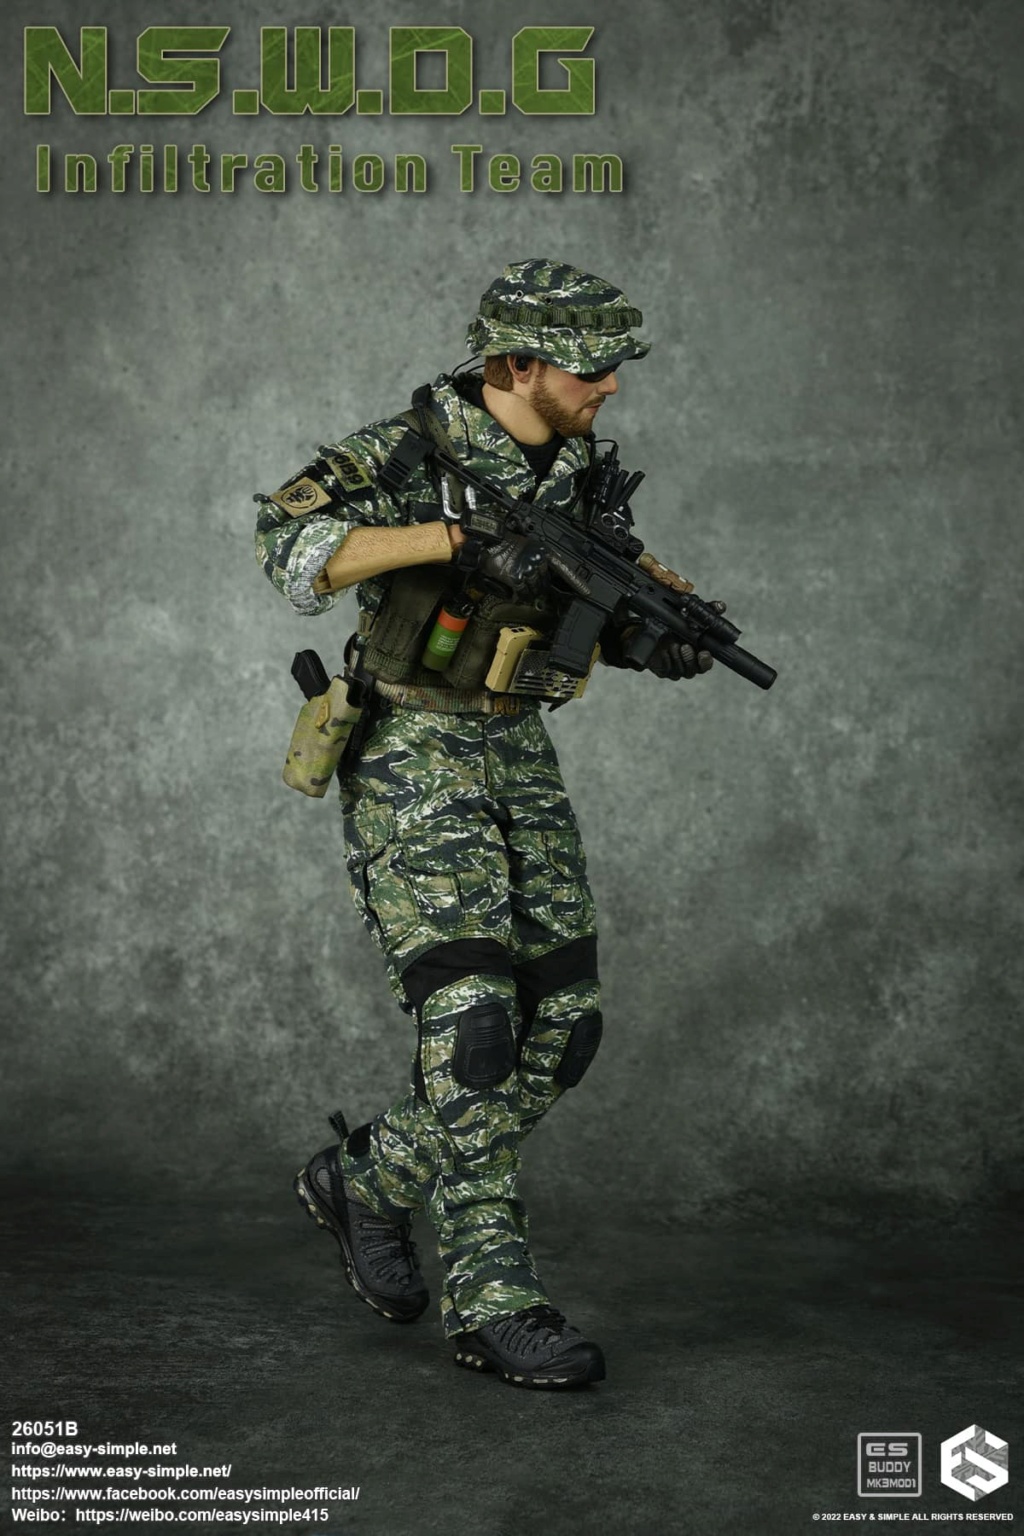 easy - NEW PRODUCT: EASY AND SIMPLE 1/6 SCALE FIGURE: N.S.W.D.G INFILTRATION TEAM - (2 Versions) 9554